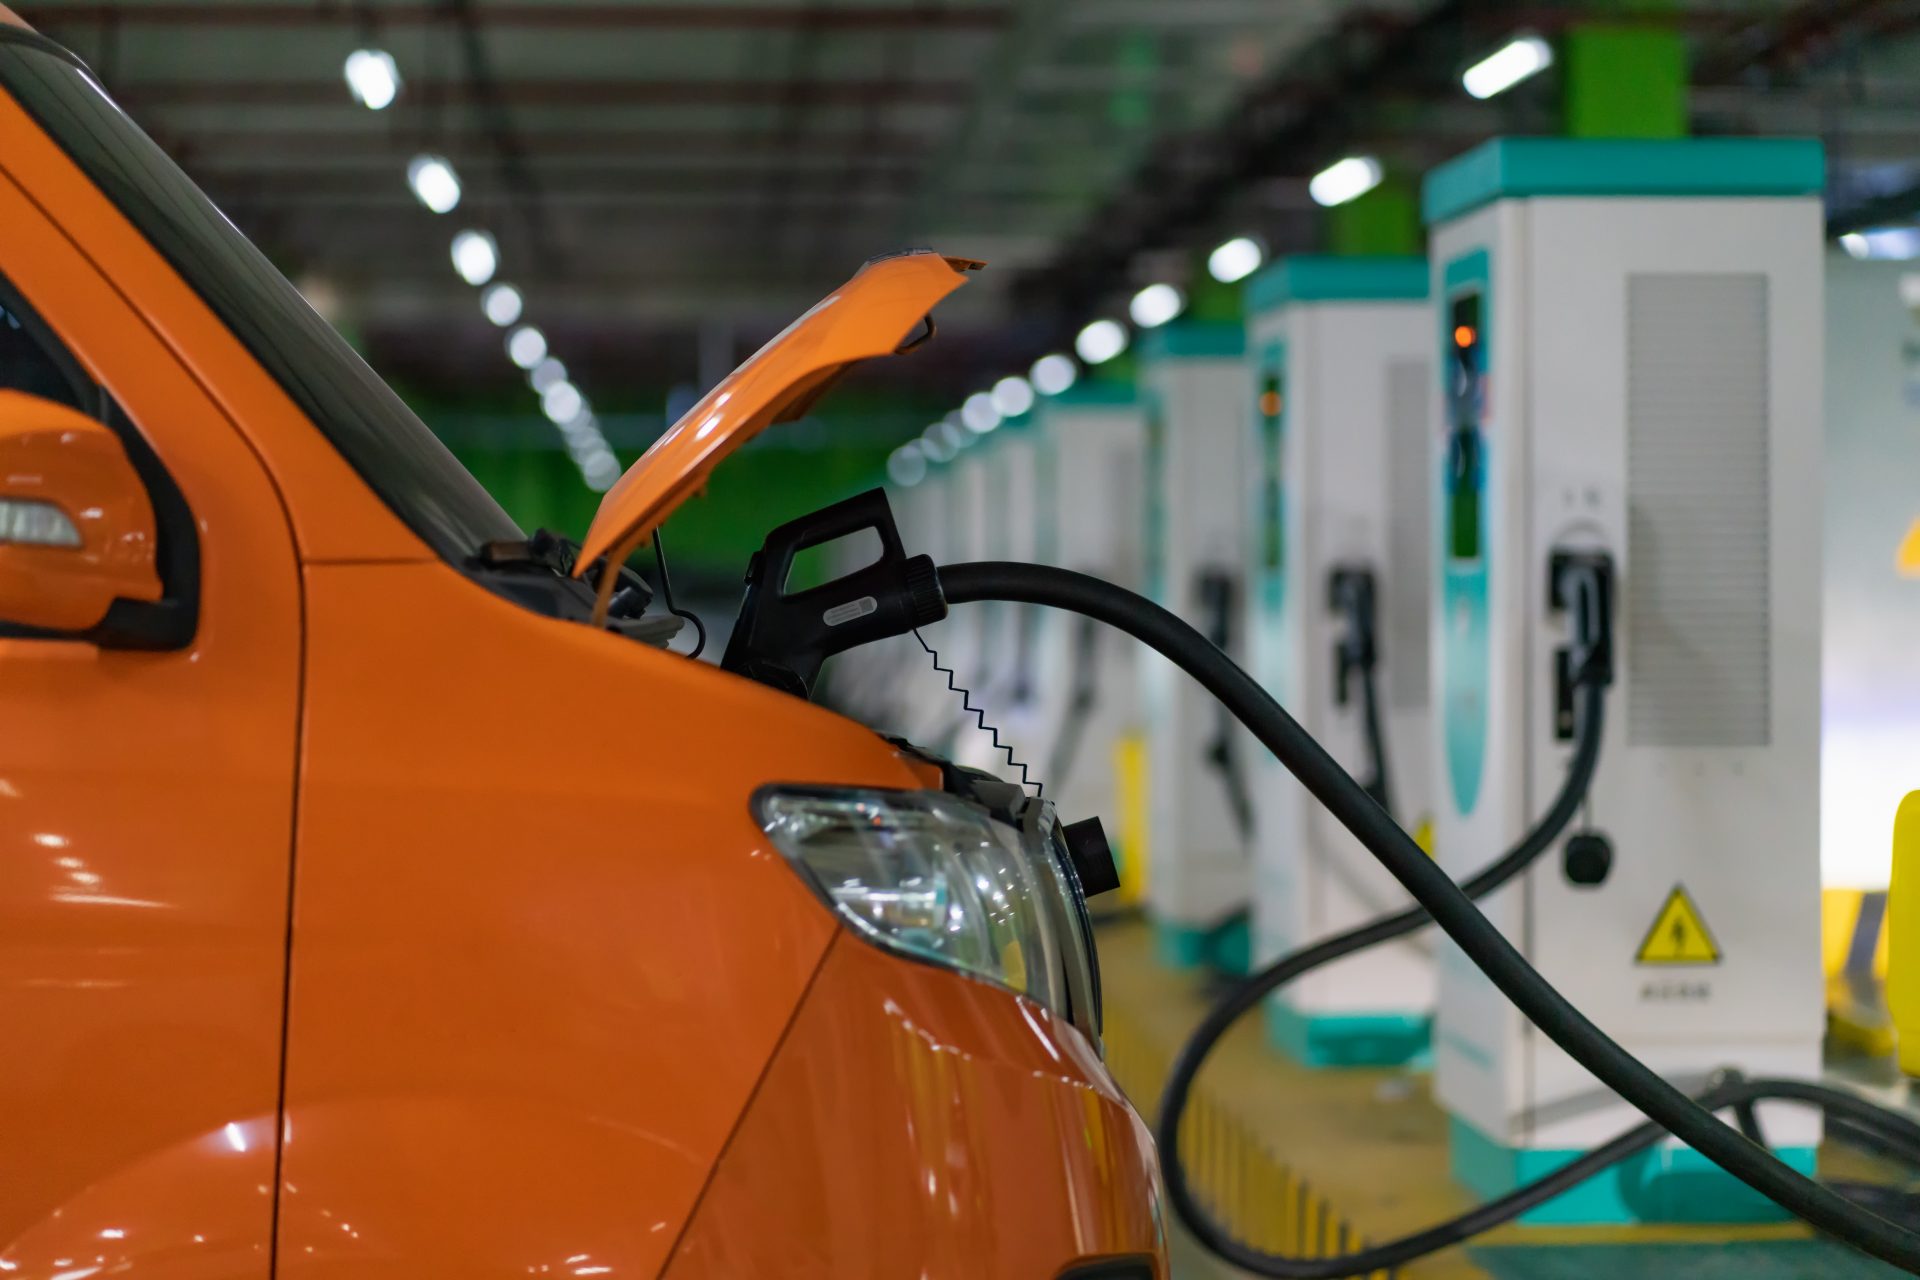 How much does a hybrid car actually consume?